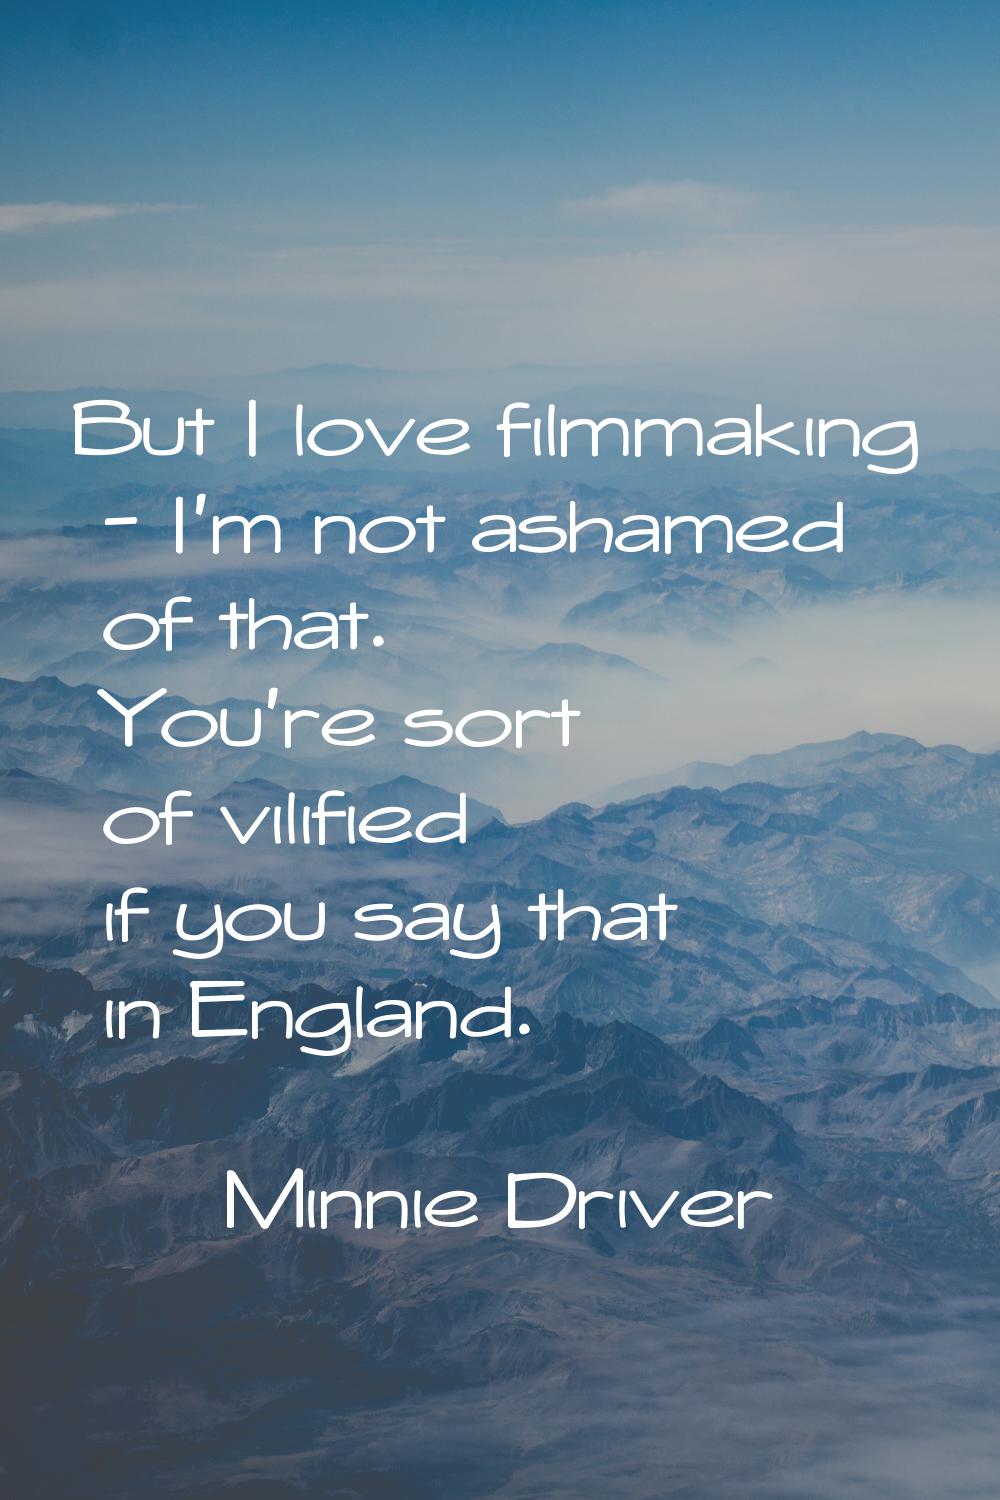 But I love filmmaking - I'm not ashamed of that. You're sort of vilified if you say that in England